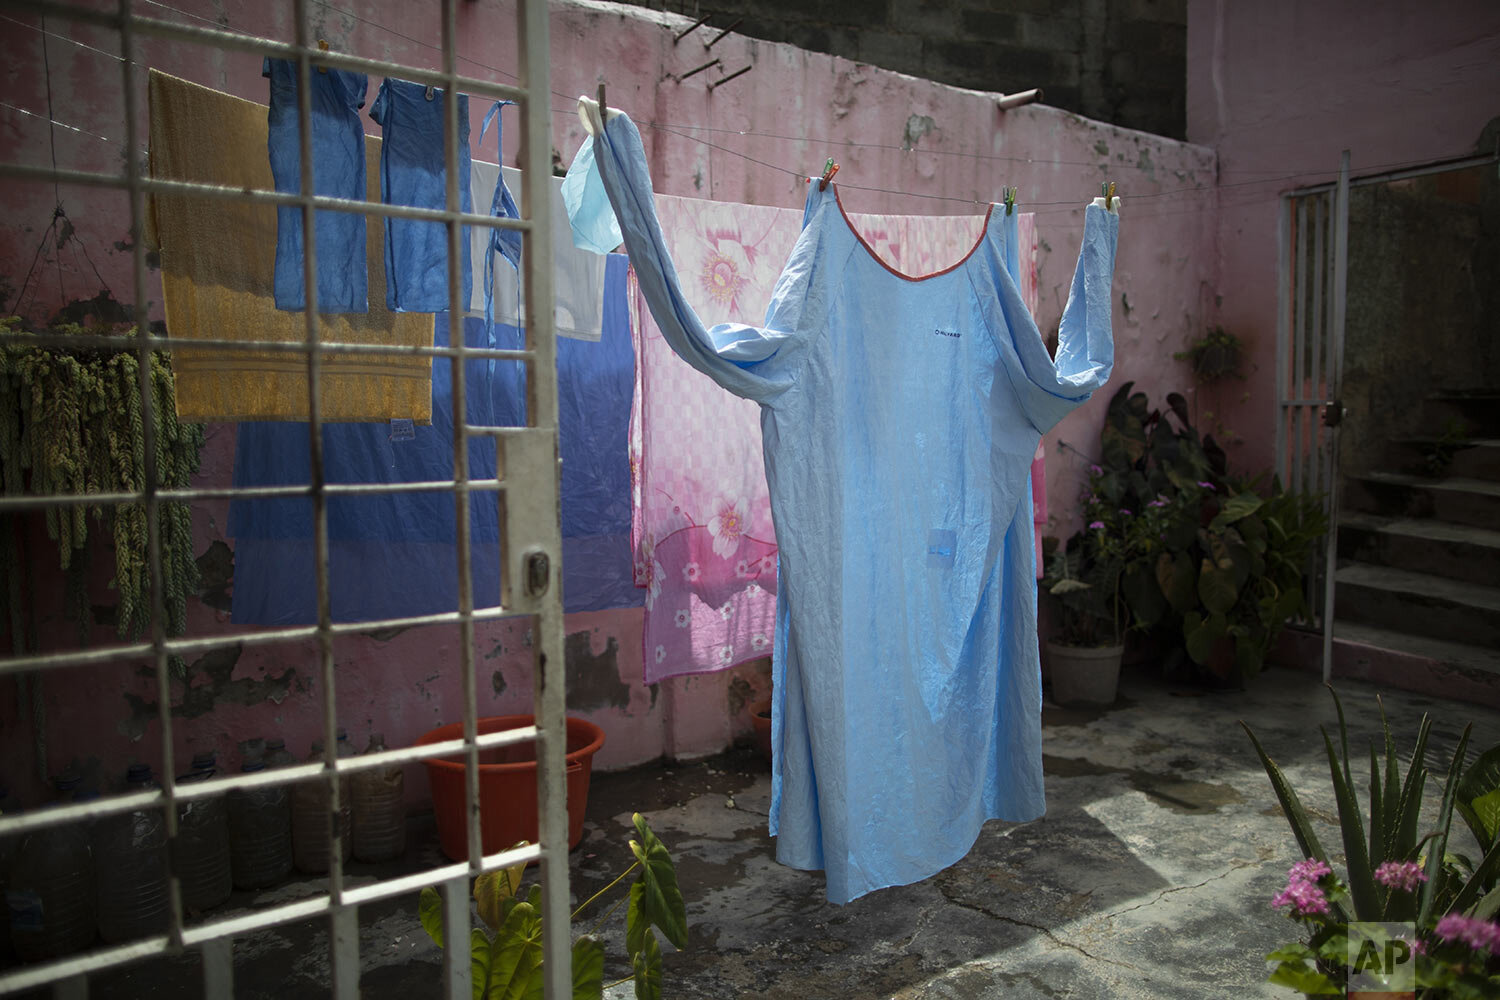  One of Elena's Suazo's two medical gowns hangs to dry at her parents' home in the Catia neighborhood of Caracas, Venezuela, Sept. 29, 2020, in between her twice-daily trips to care for her hospitalized father in the COVID-19 wing of the Jose Gregori